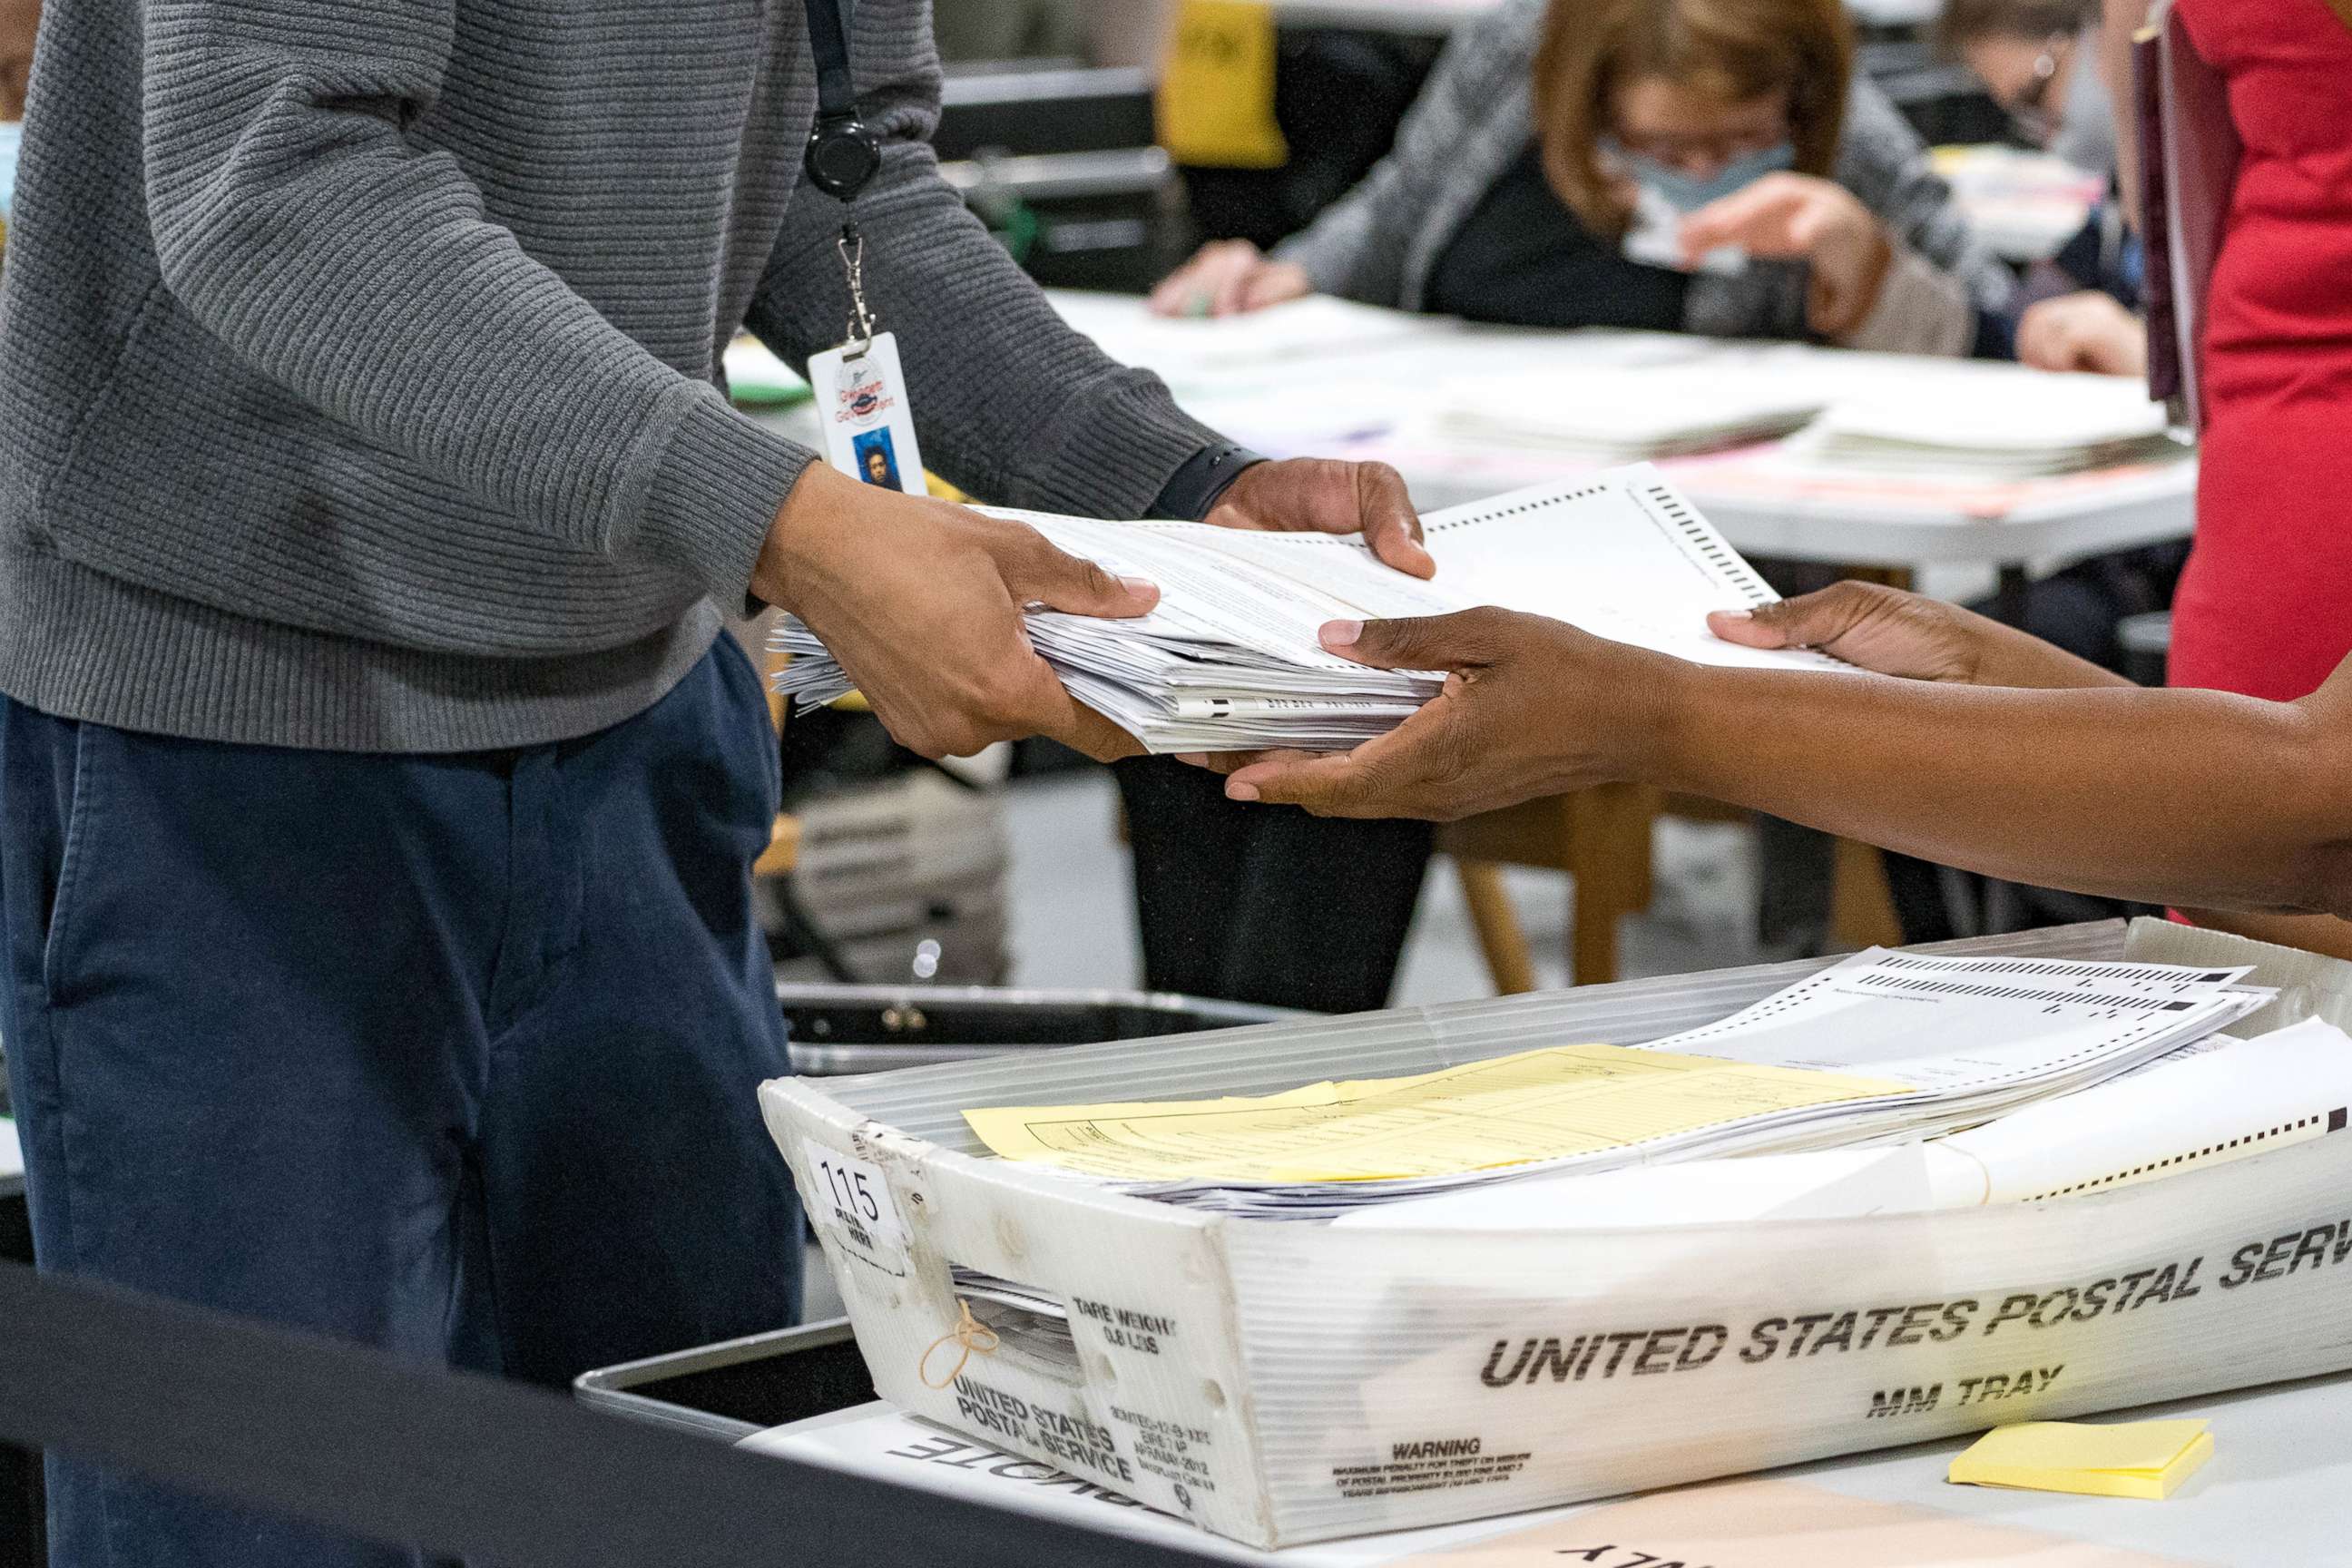 PHOTO: Gwinnett County election workers handle ballots as part of the recount for the 2020 presidential election at the Beauty P. Baldwin Voter Registrations and Elections Building, Nov. 16, 2020, in Lawrenceville, Georgia.